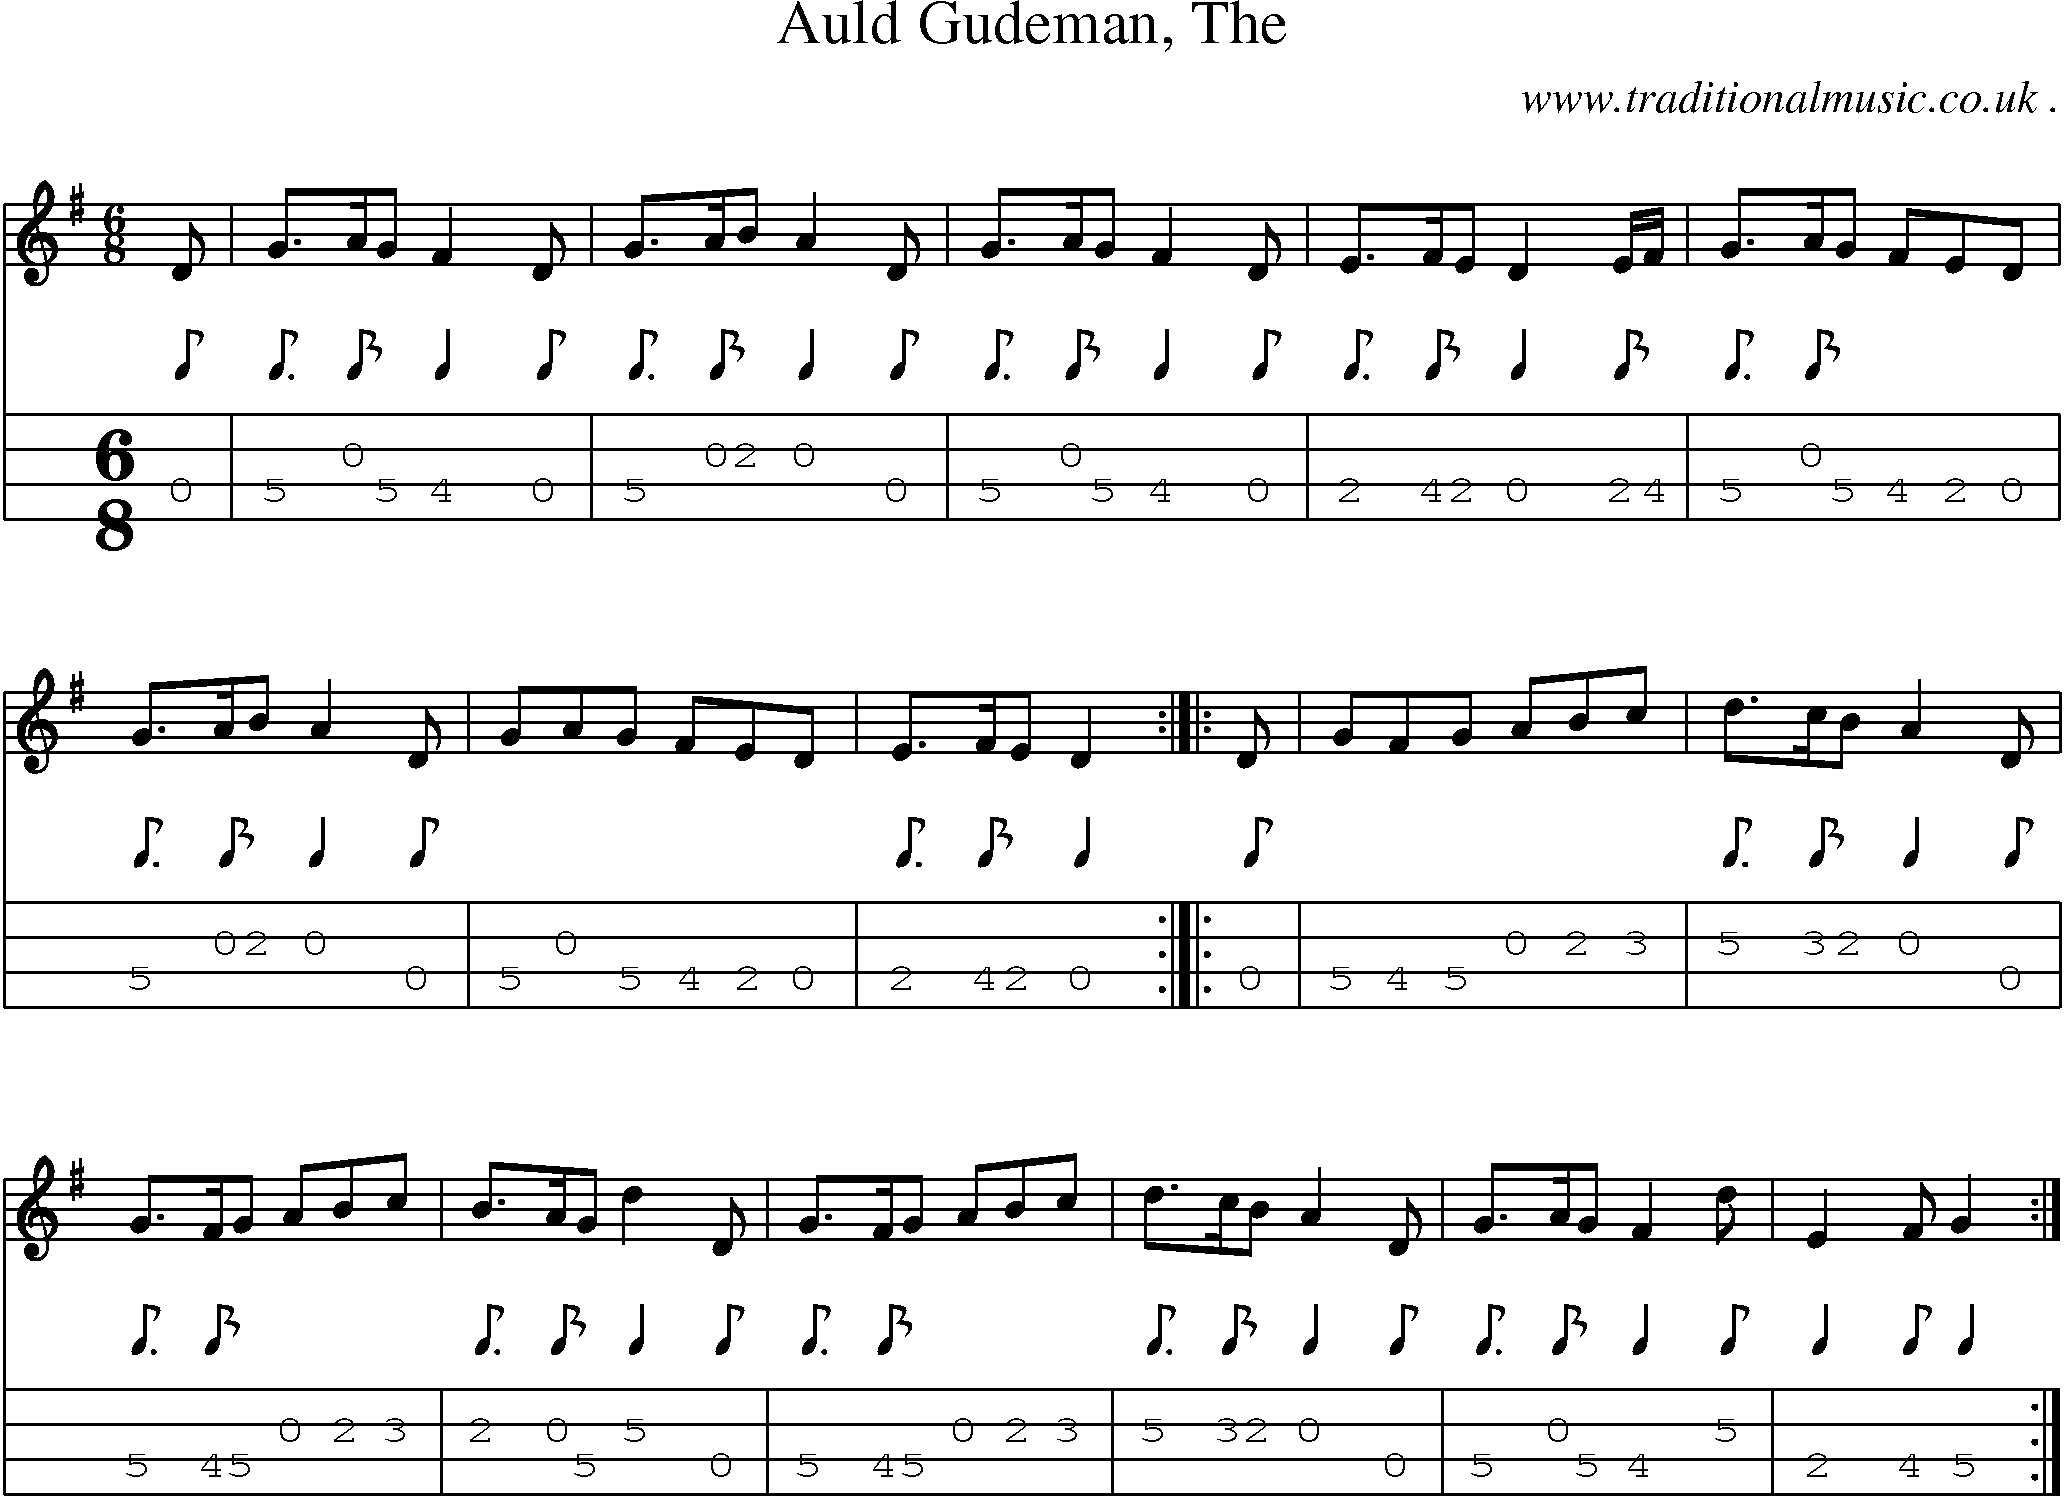 Sheet-music  score, Chords and Mandolin Tabs for Auld Gudeman The